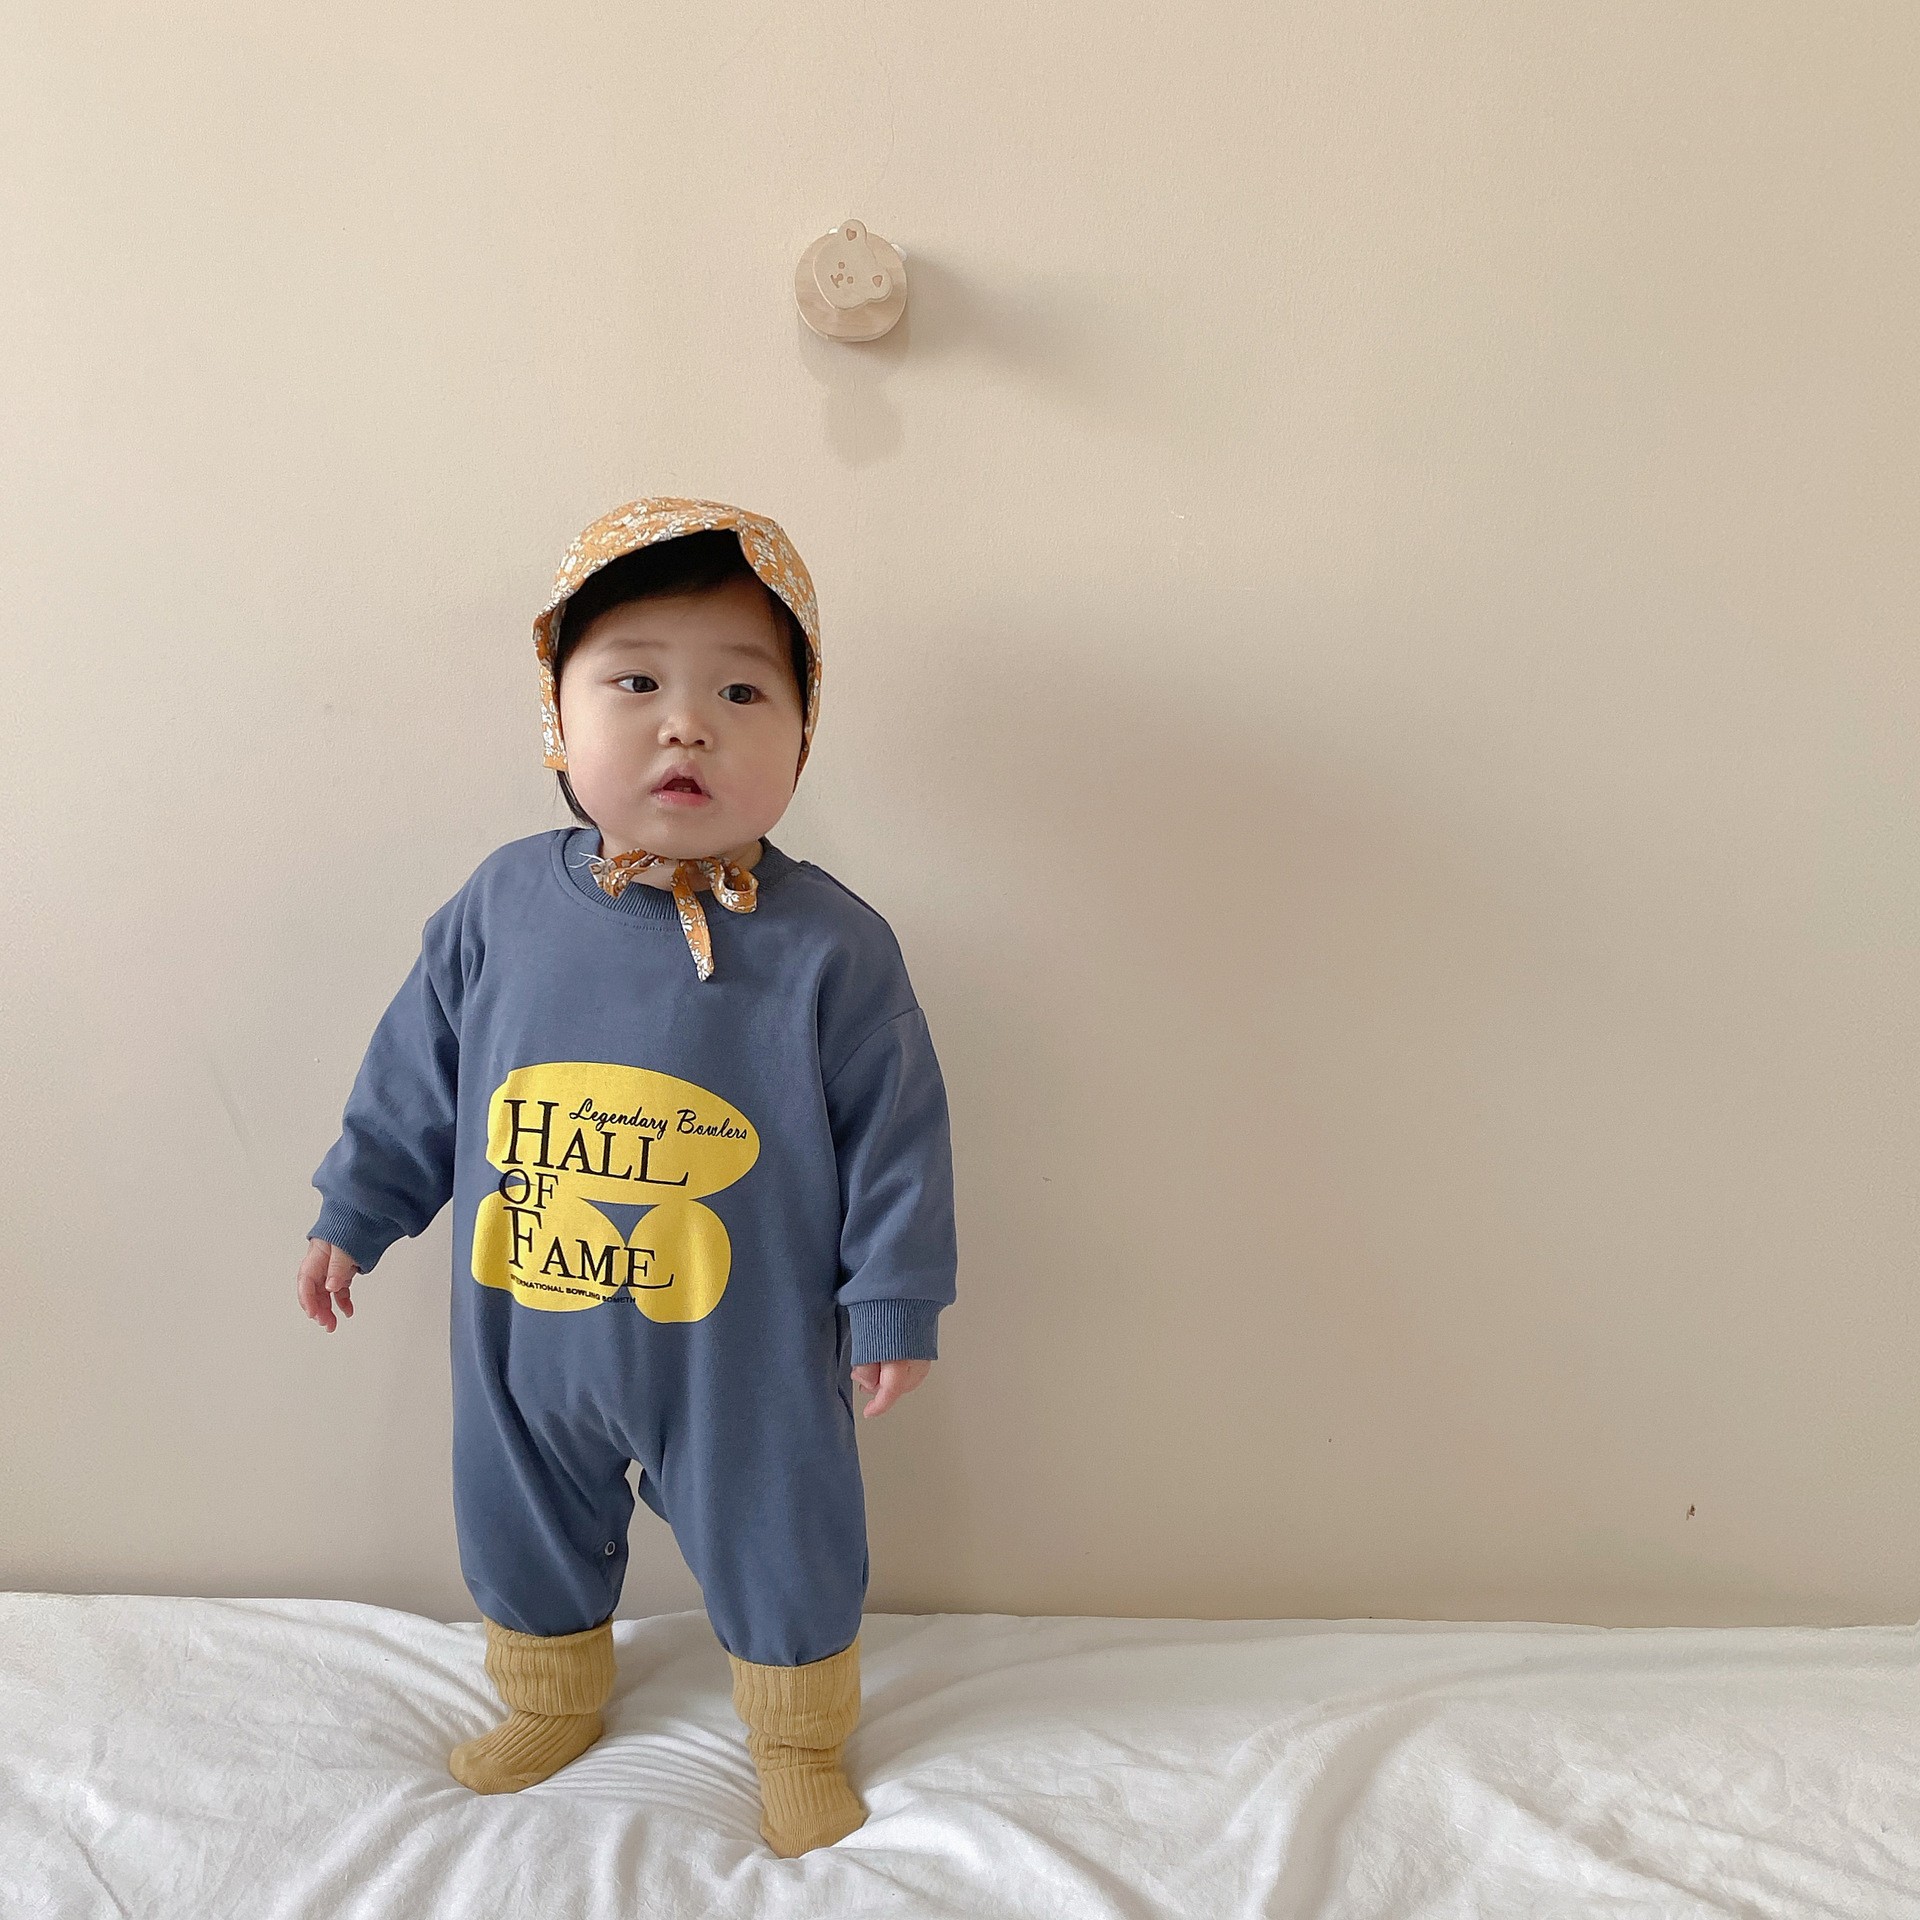 2022 Spring New Baby Boy Romper Cotton Long Sleeve Infant Jumpsuit Letter Print Baby Boy Clothes Kids Overalls Outfits 0-24m